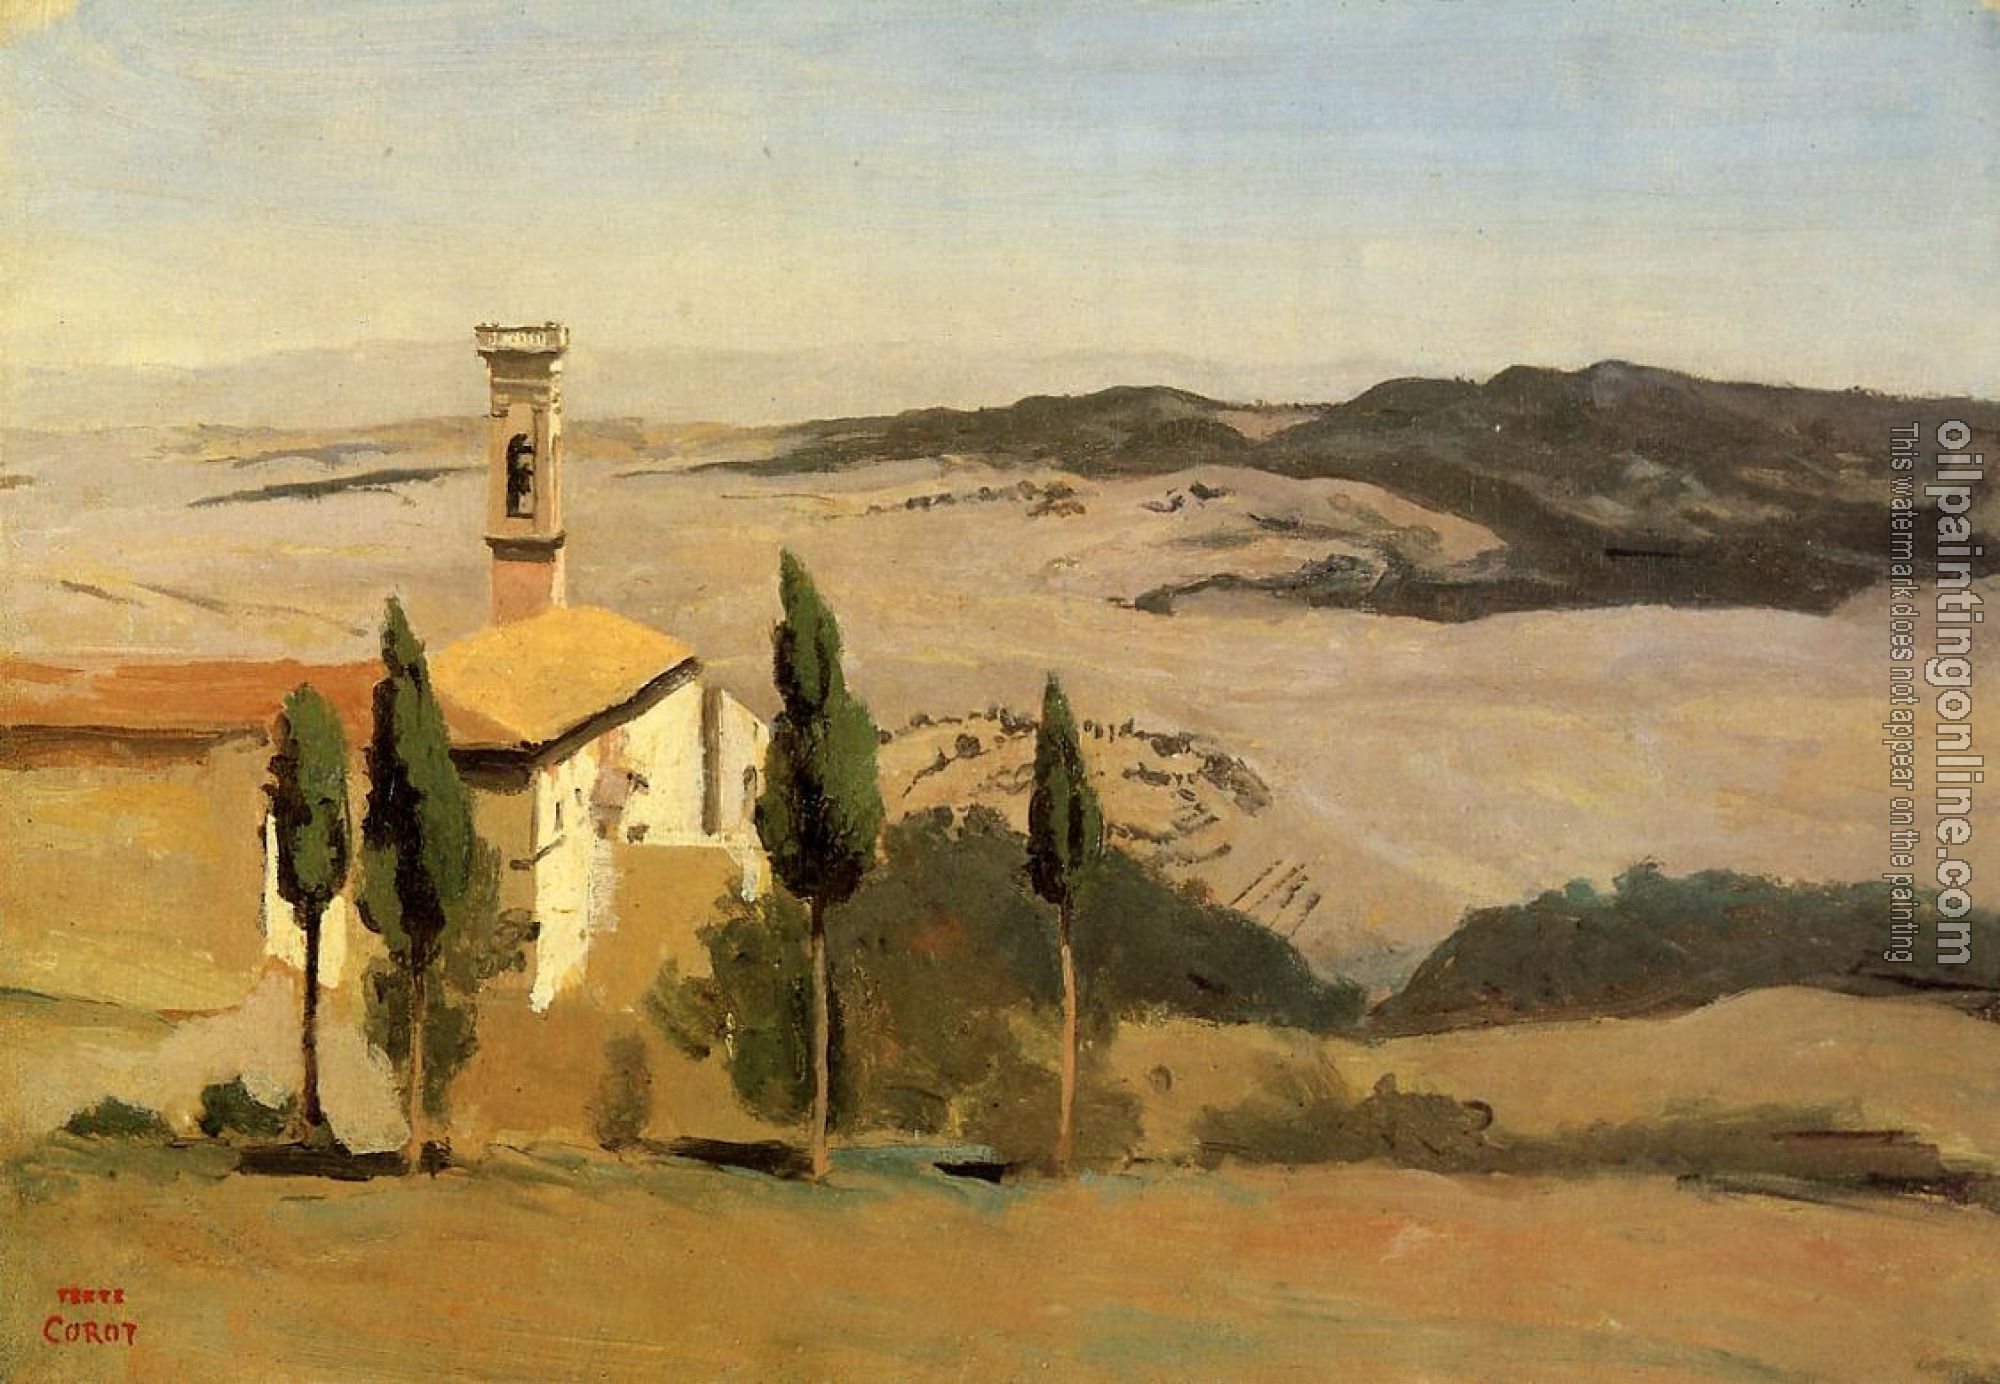 Corot, Jean-Baptiste-Camille - Volterra - Church and Bell Tower